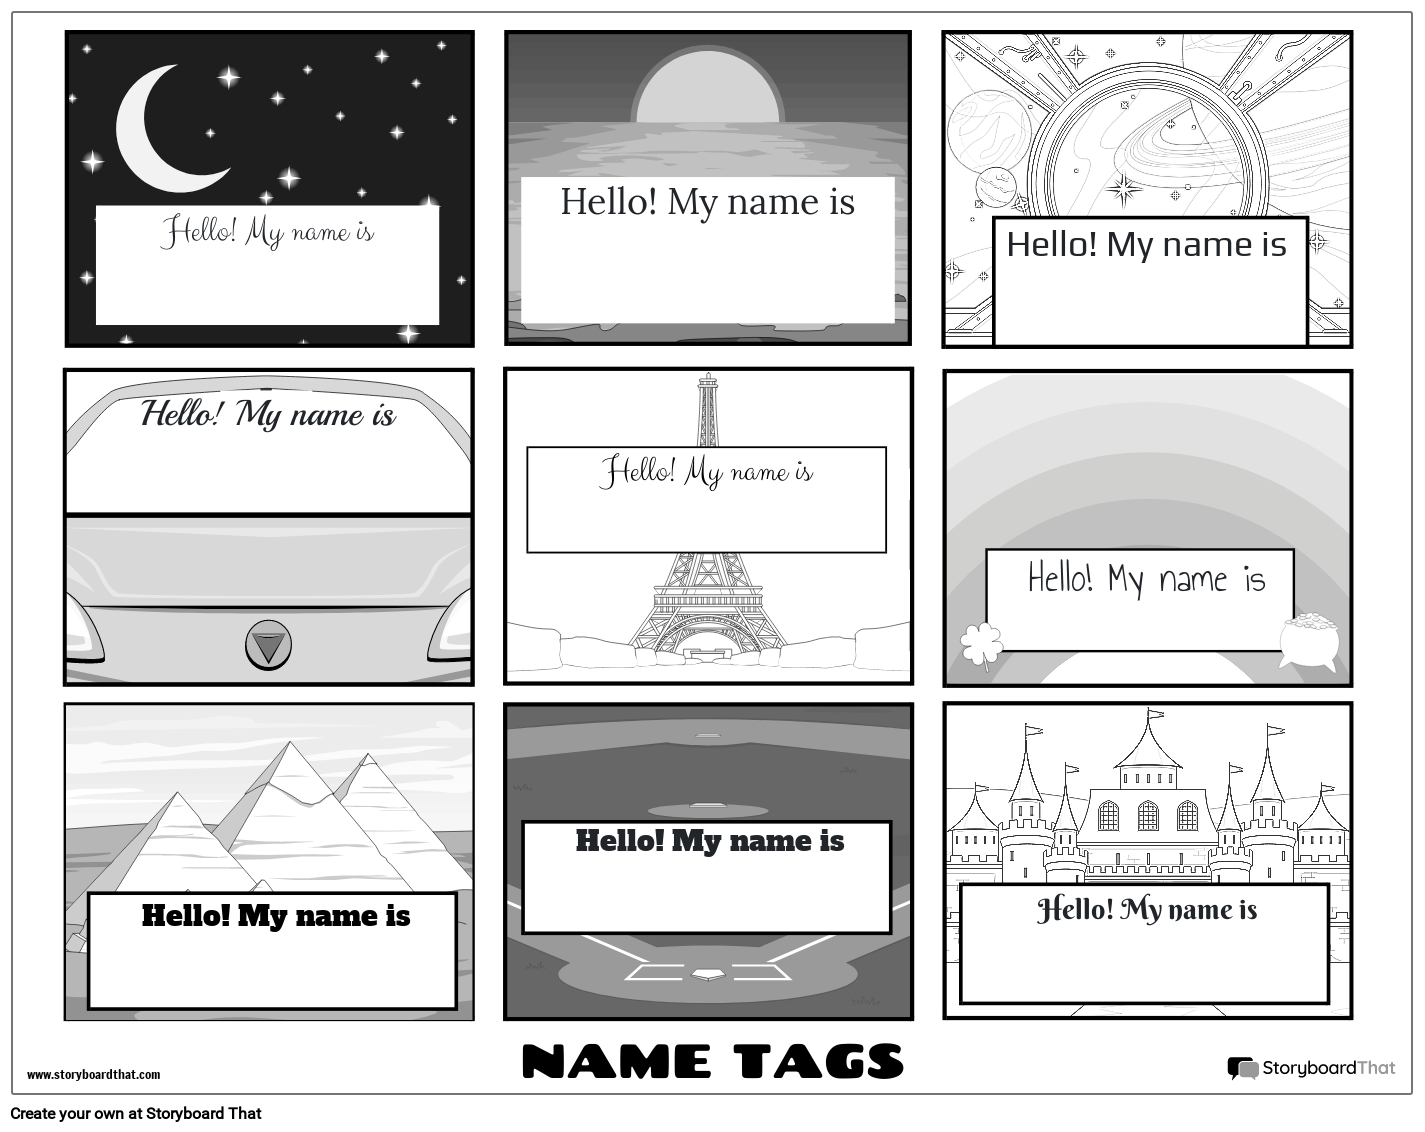 New Create Page Name Tag Template 2 Black & White